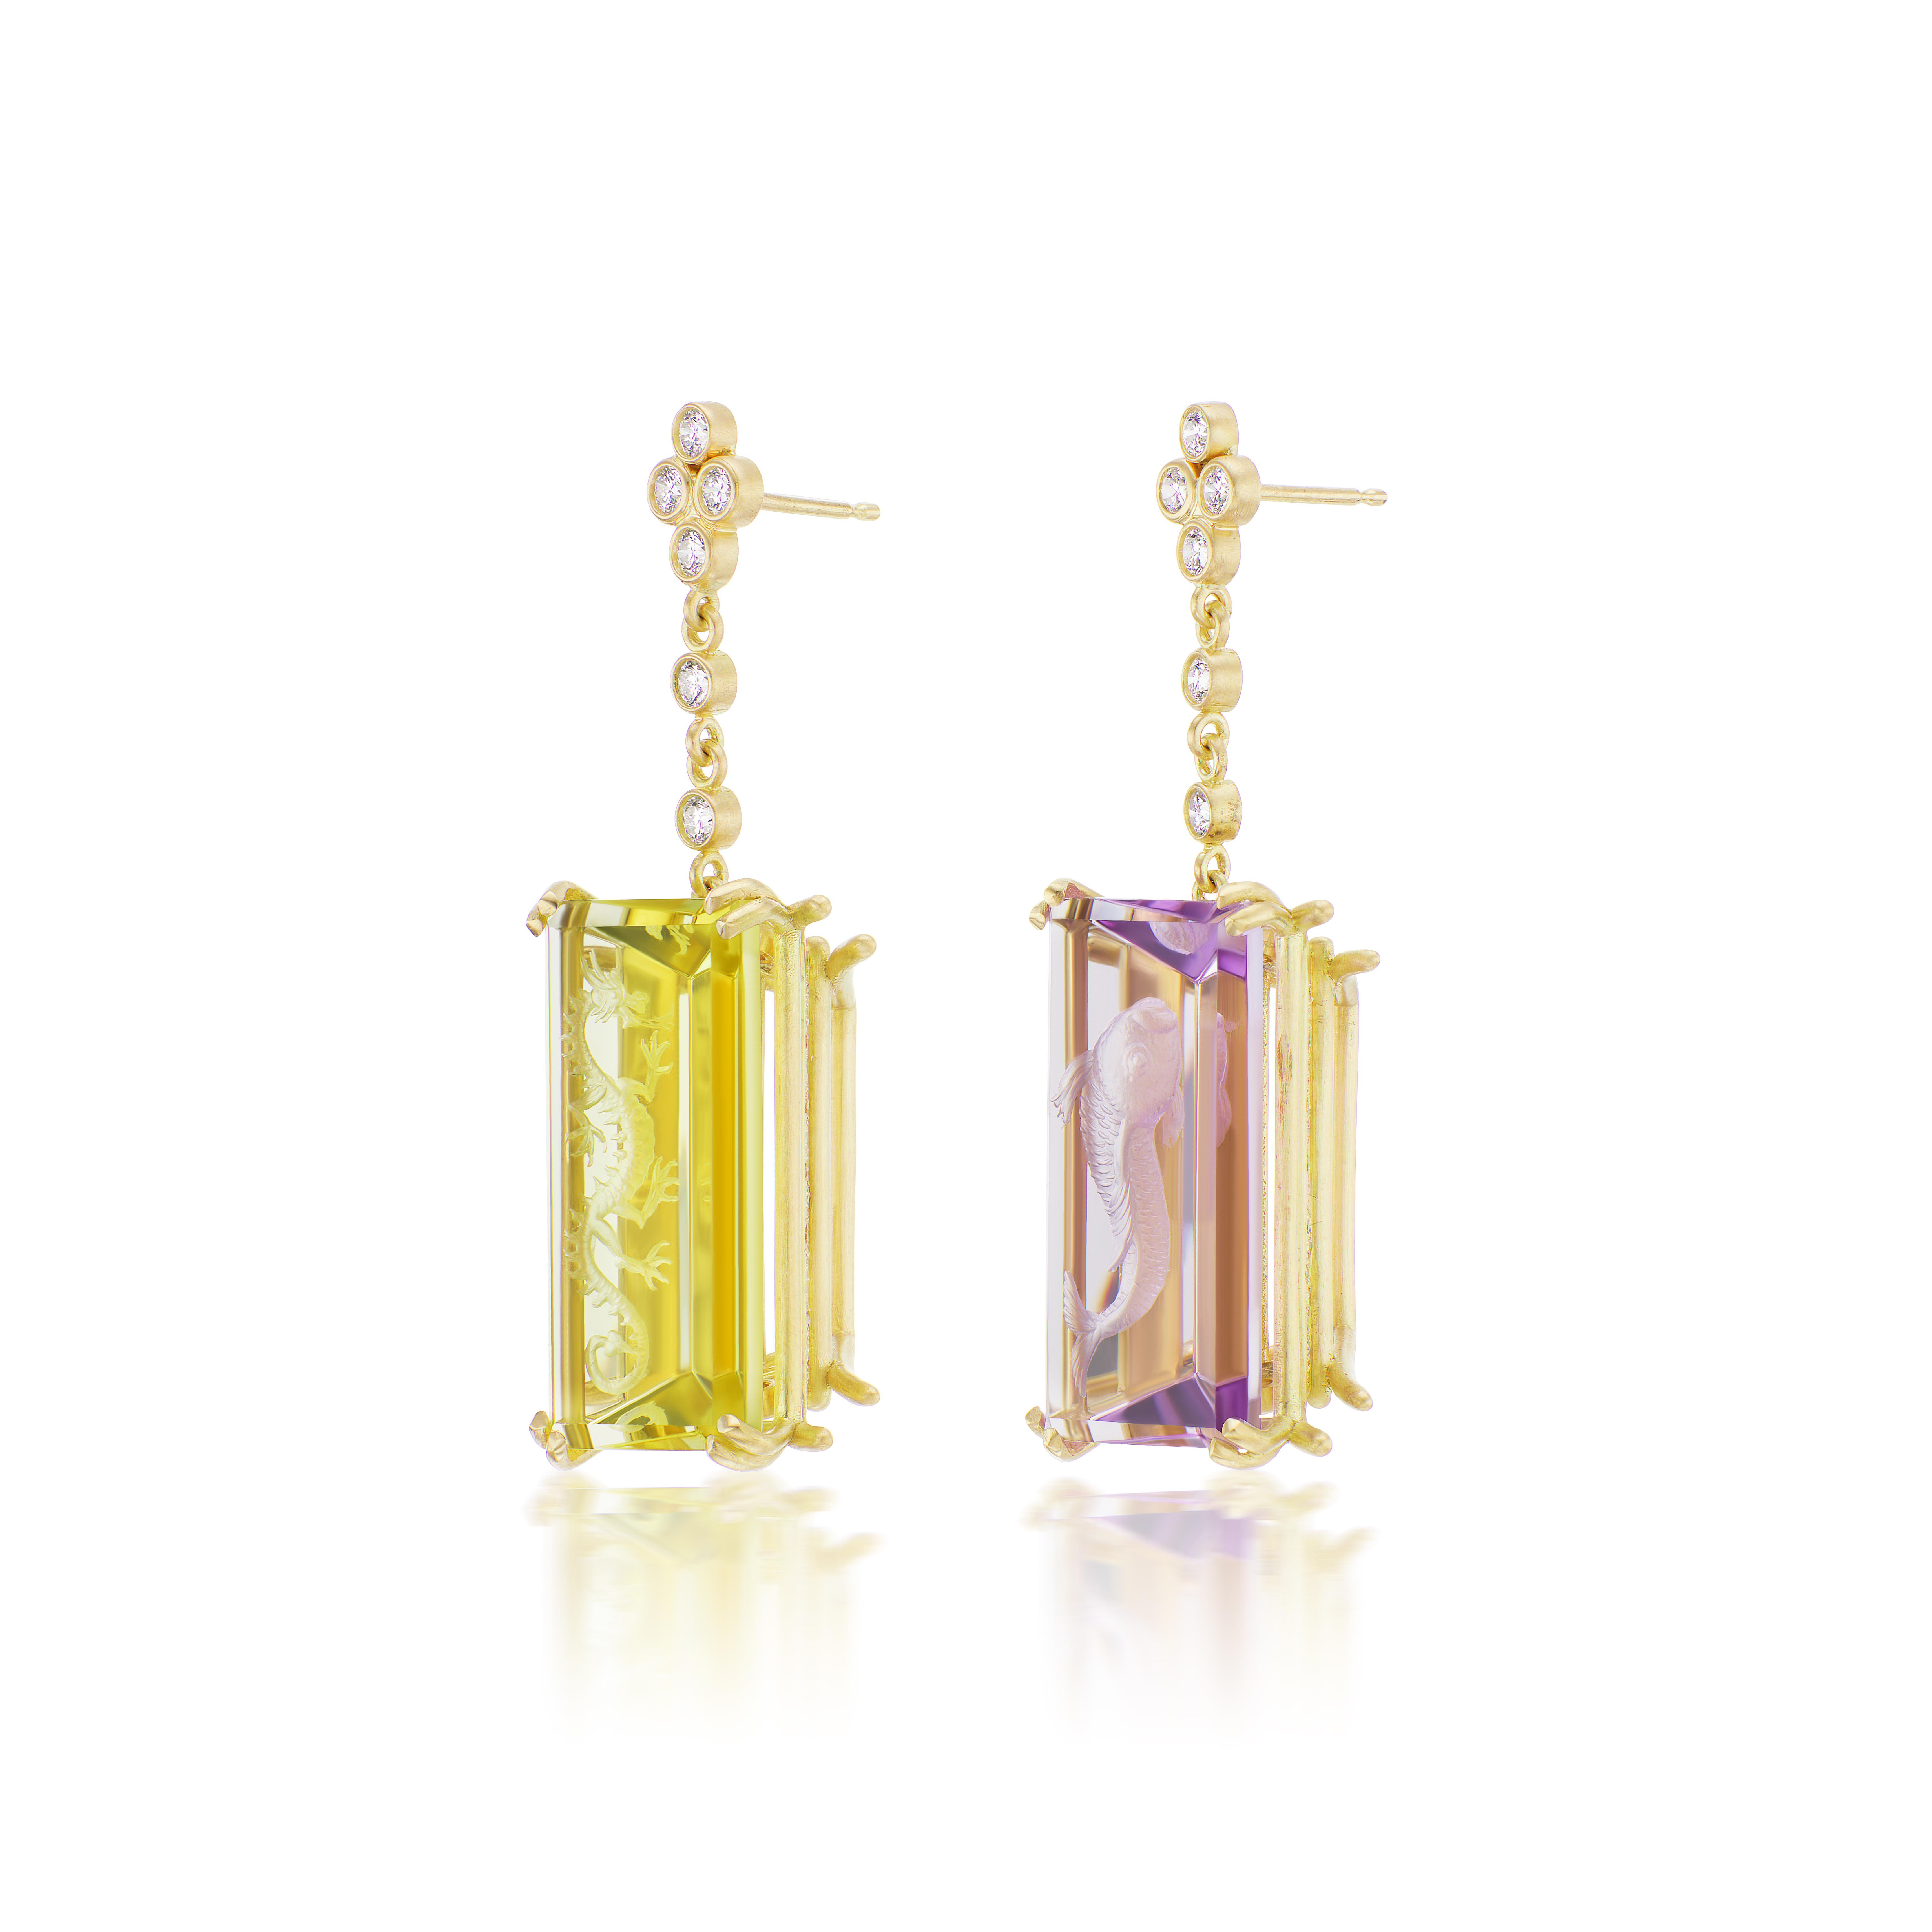 Contemporary Wendy Brandes Amethyst and Citrine Yellow Gold Dangle Earrings with Diamonds